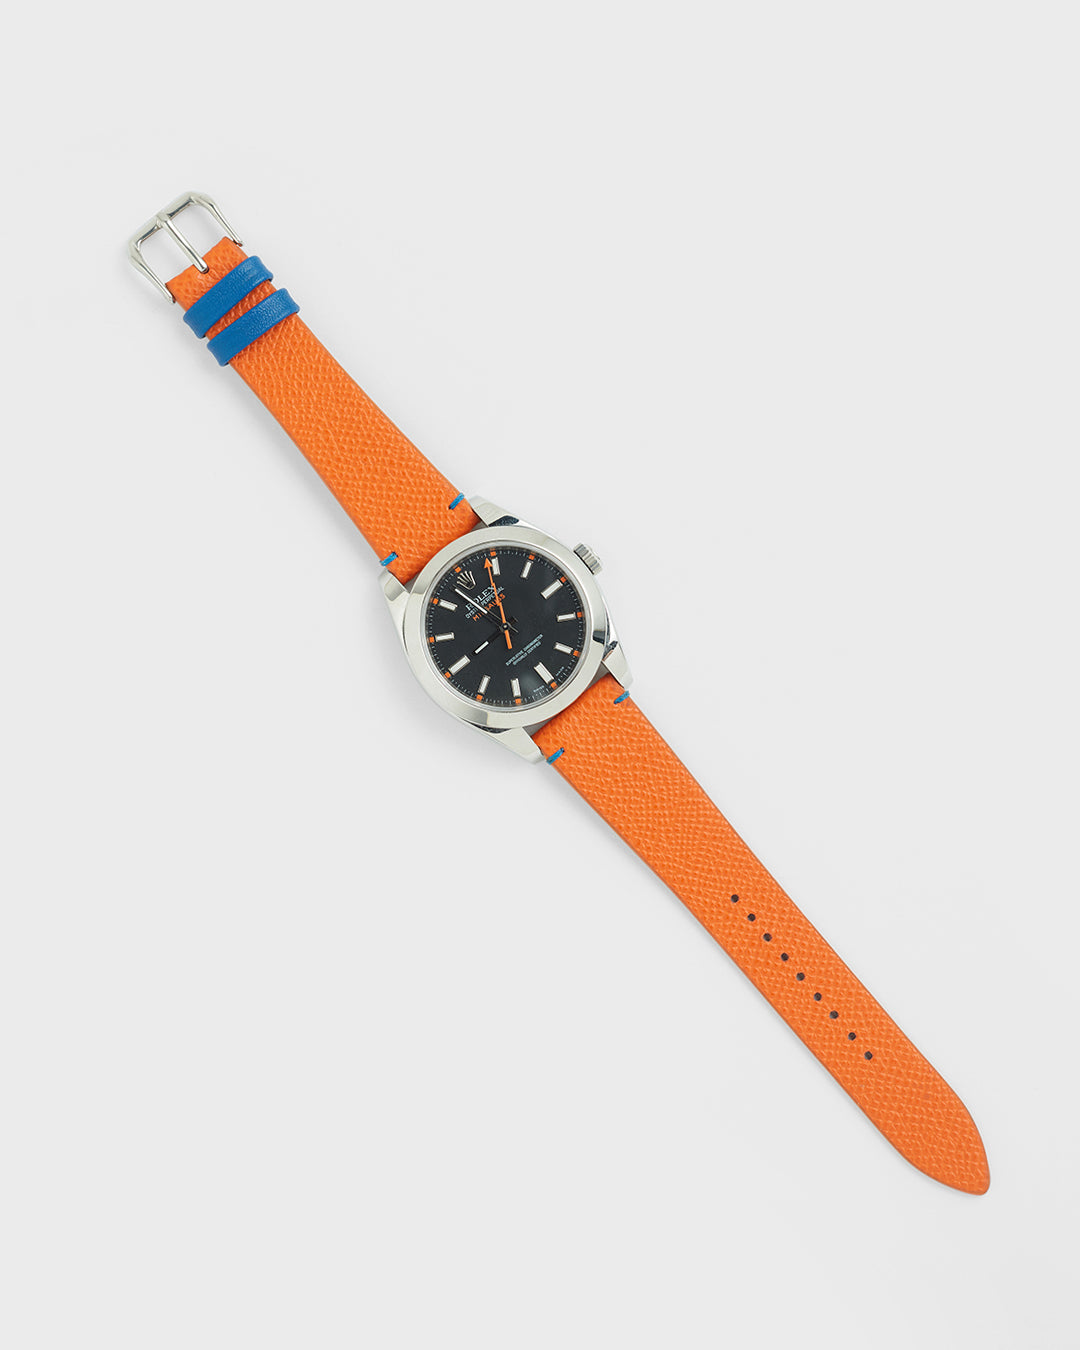 INTRO STRAP - FOR QUARTZ, MECHANICAL & SMART WATCHES [Duo Stitch in Italian Epsom Leather] HEllO